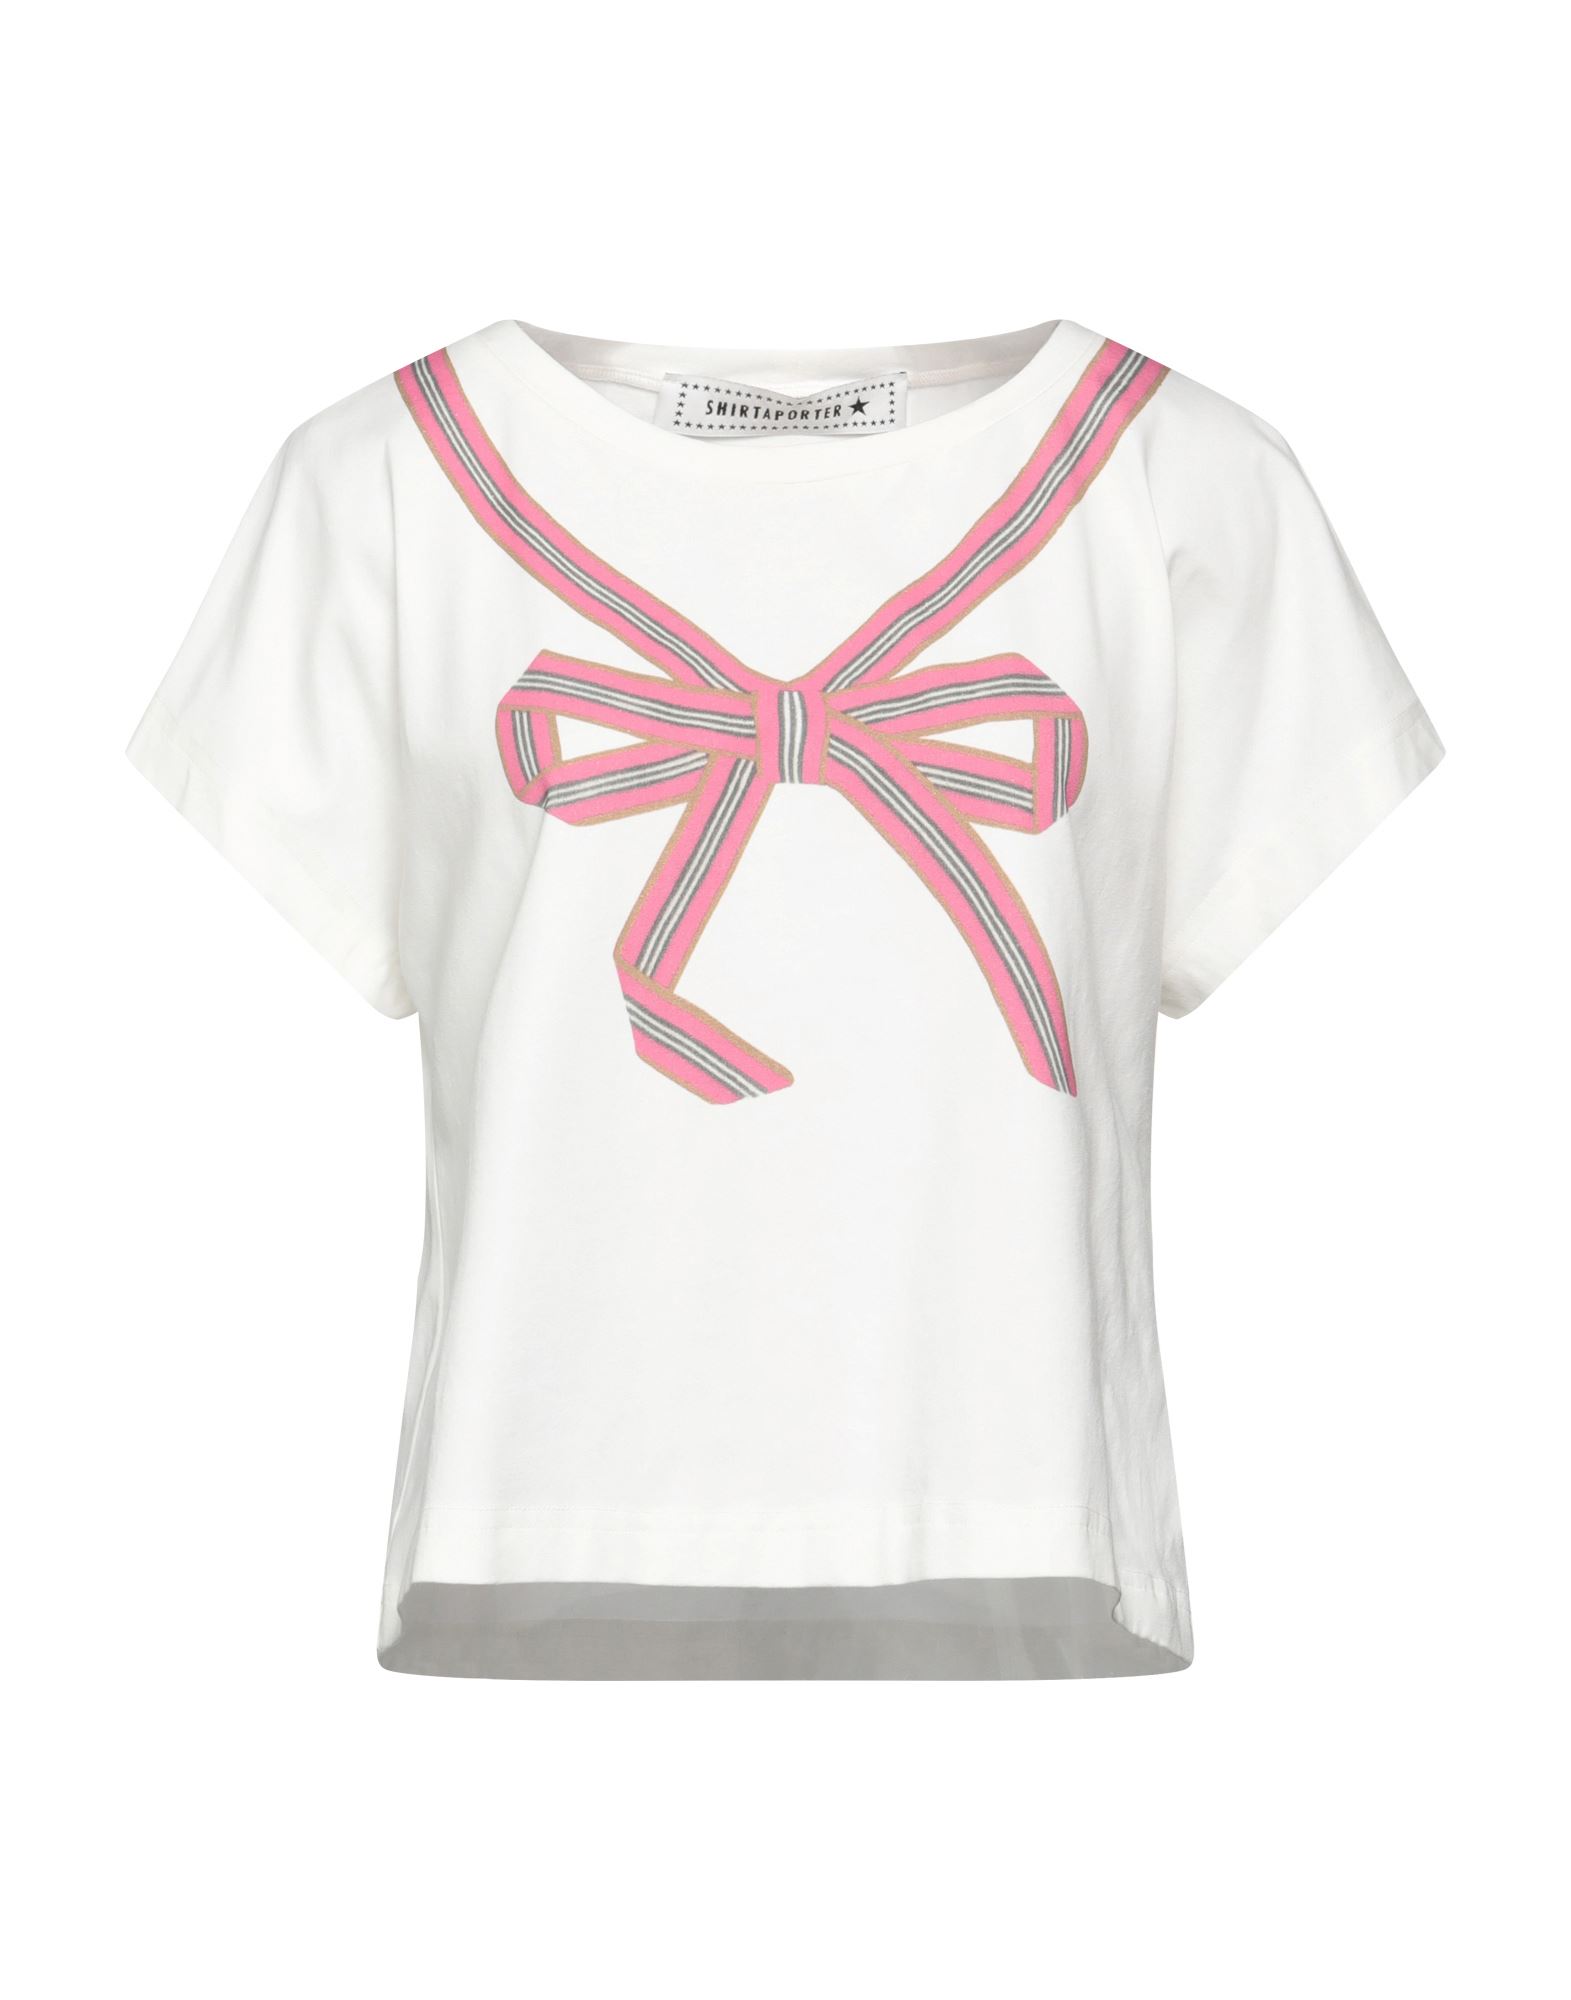 Shirtaporter T-shirts In White